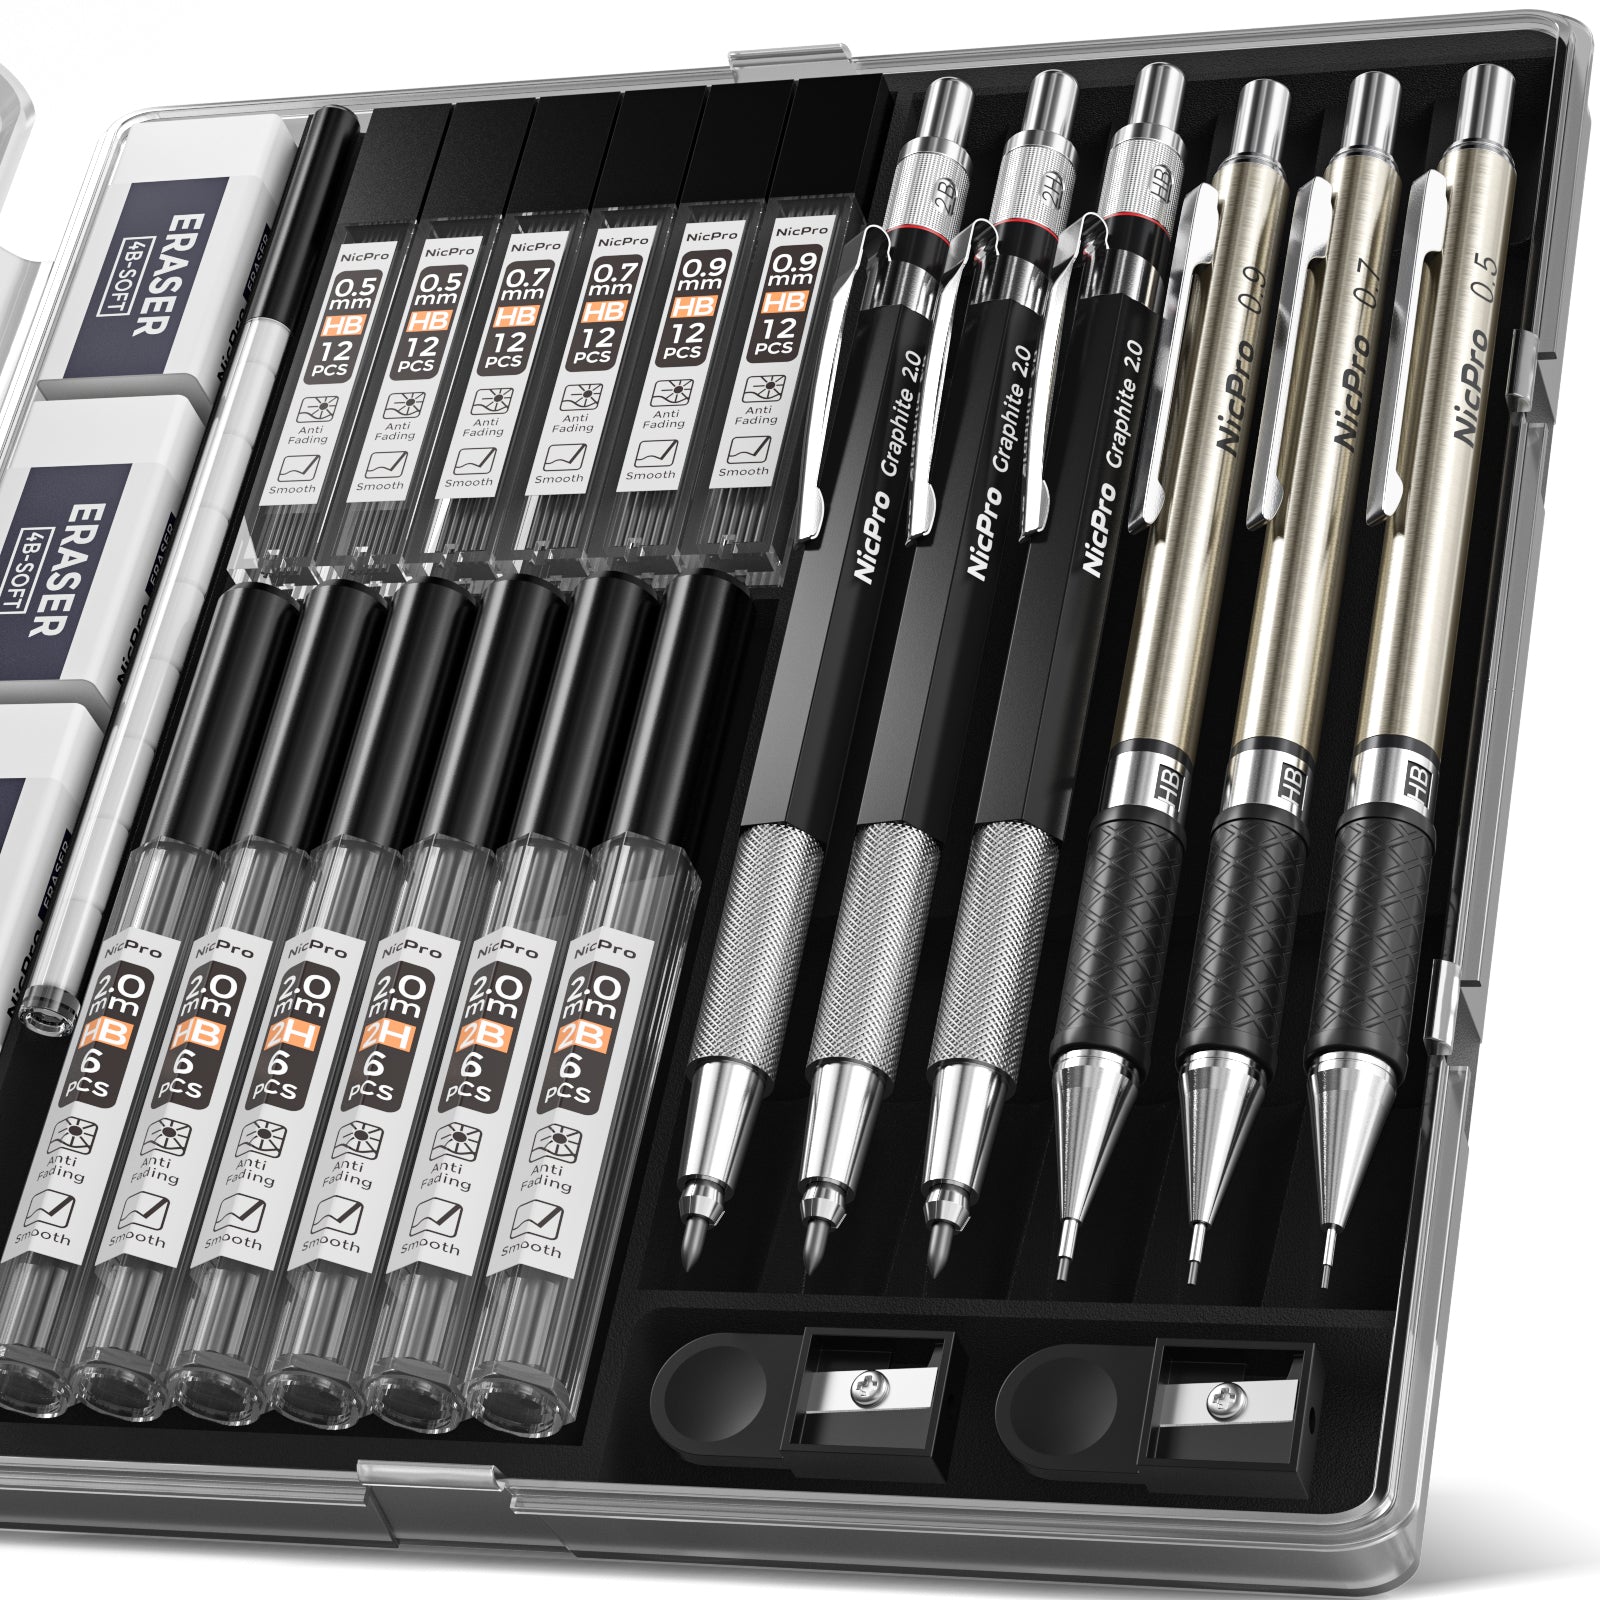 Nicpro 27PCS Art Mechanical Pencils Set in Case, Metal Drafting Pencil 0.5,  0.7, 0.9 mm & 2mm with 13 Tube Lead Refills(4B 2B HB 2H 4H Colors)